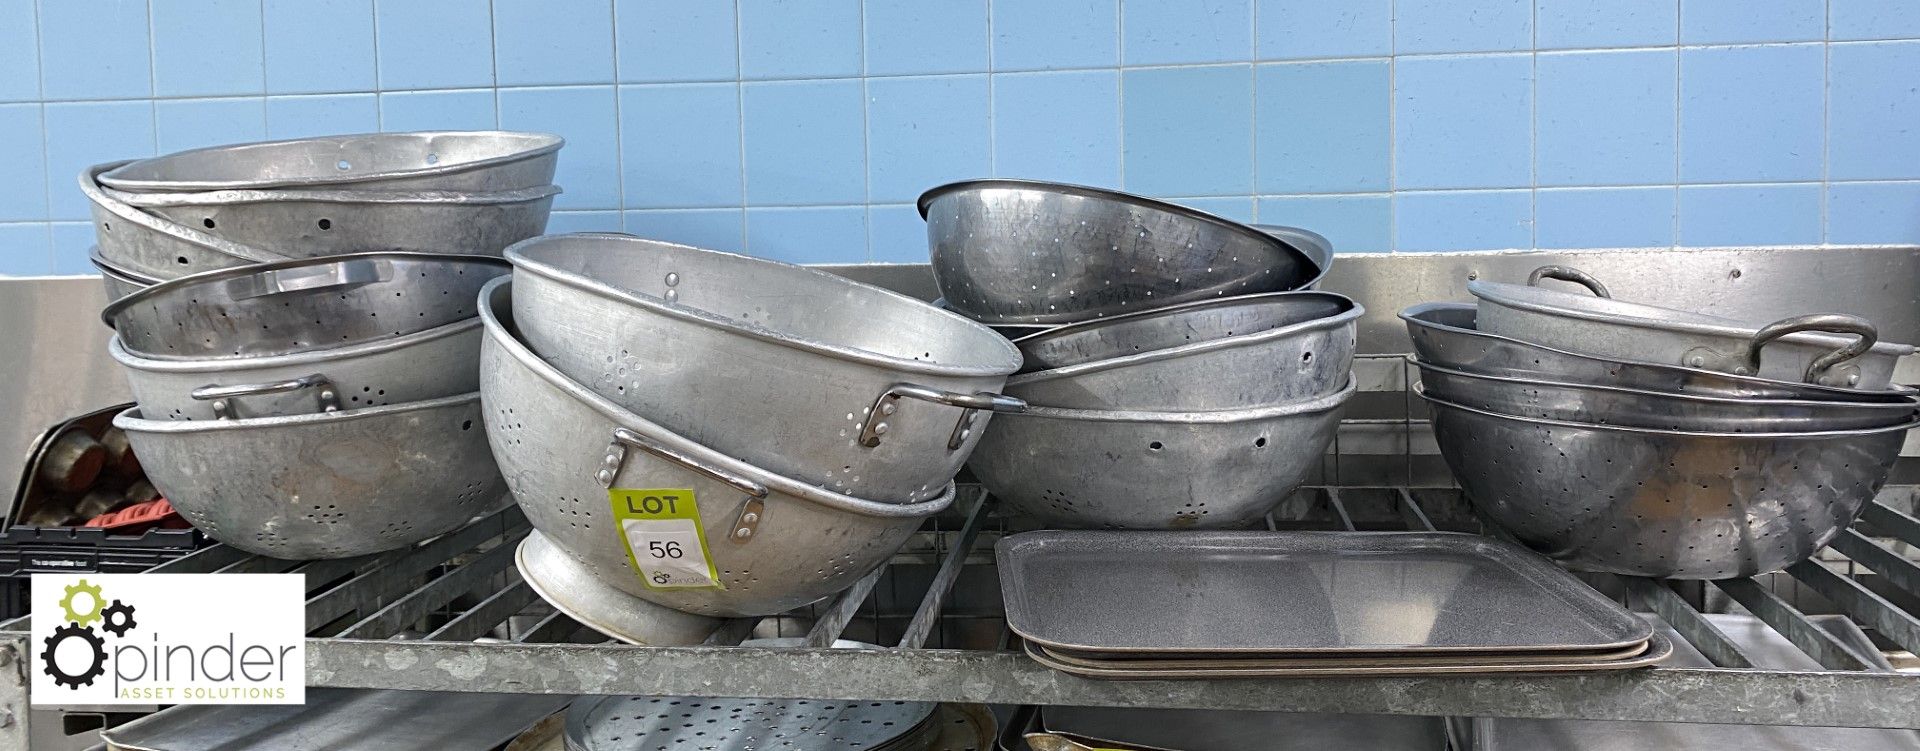 Approx 15 various Colanders (located in Pot Wash Room)